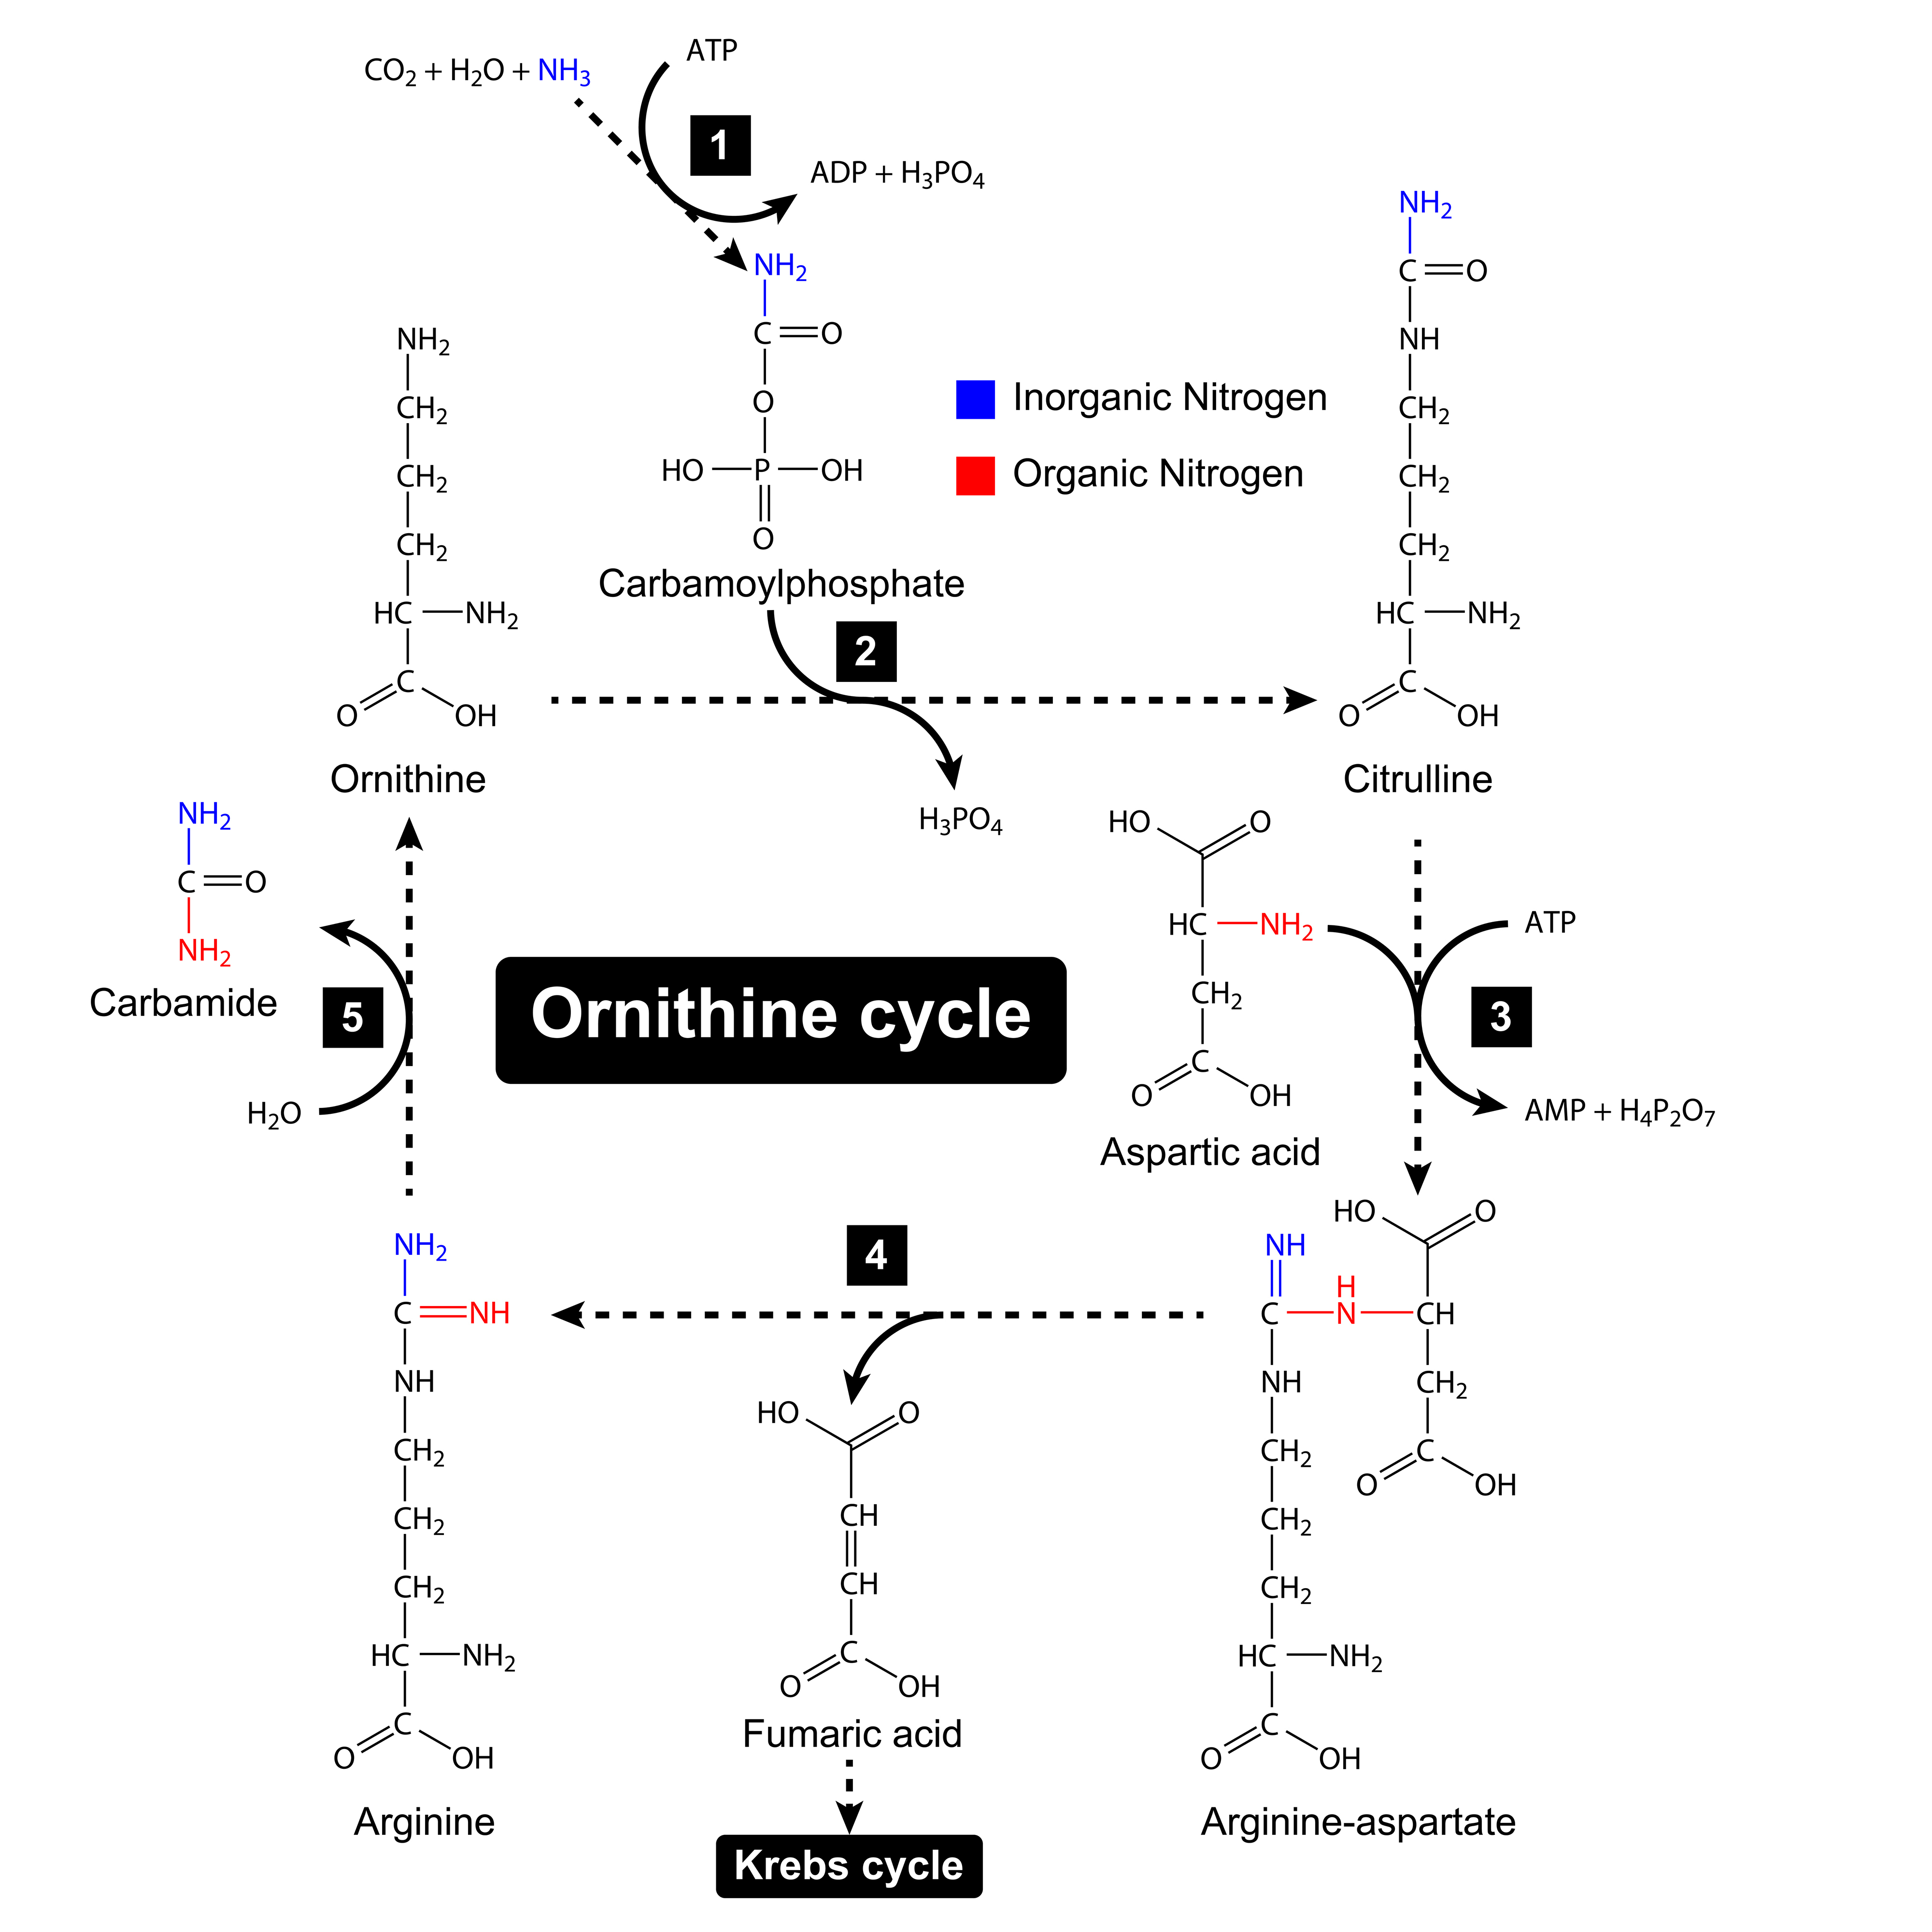 Ornithine actions are mainly related to being a main part of Ornithine cycle - crucial for proper Nitrogen balance